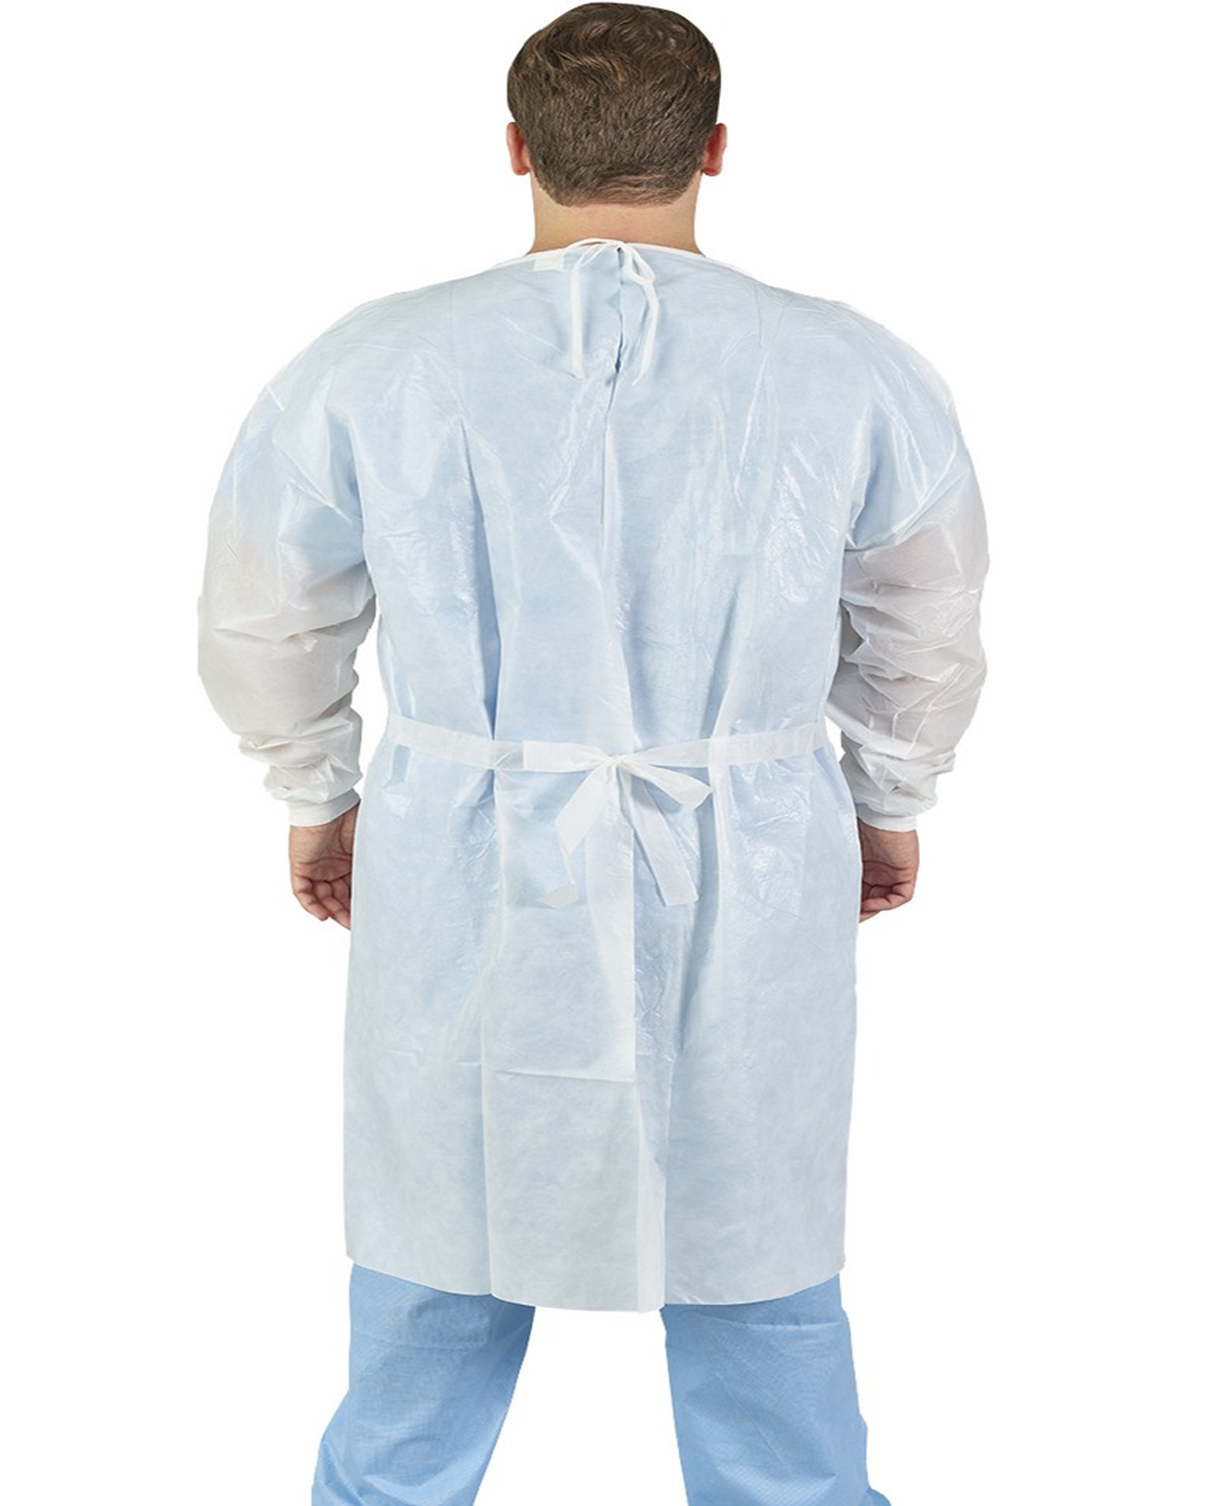 47002 Halyard White X-Large Poly-Coated Isolation Gowns